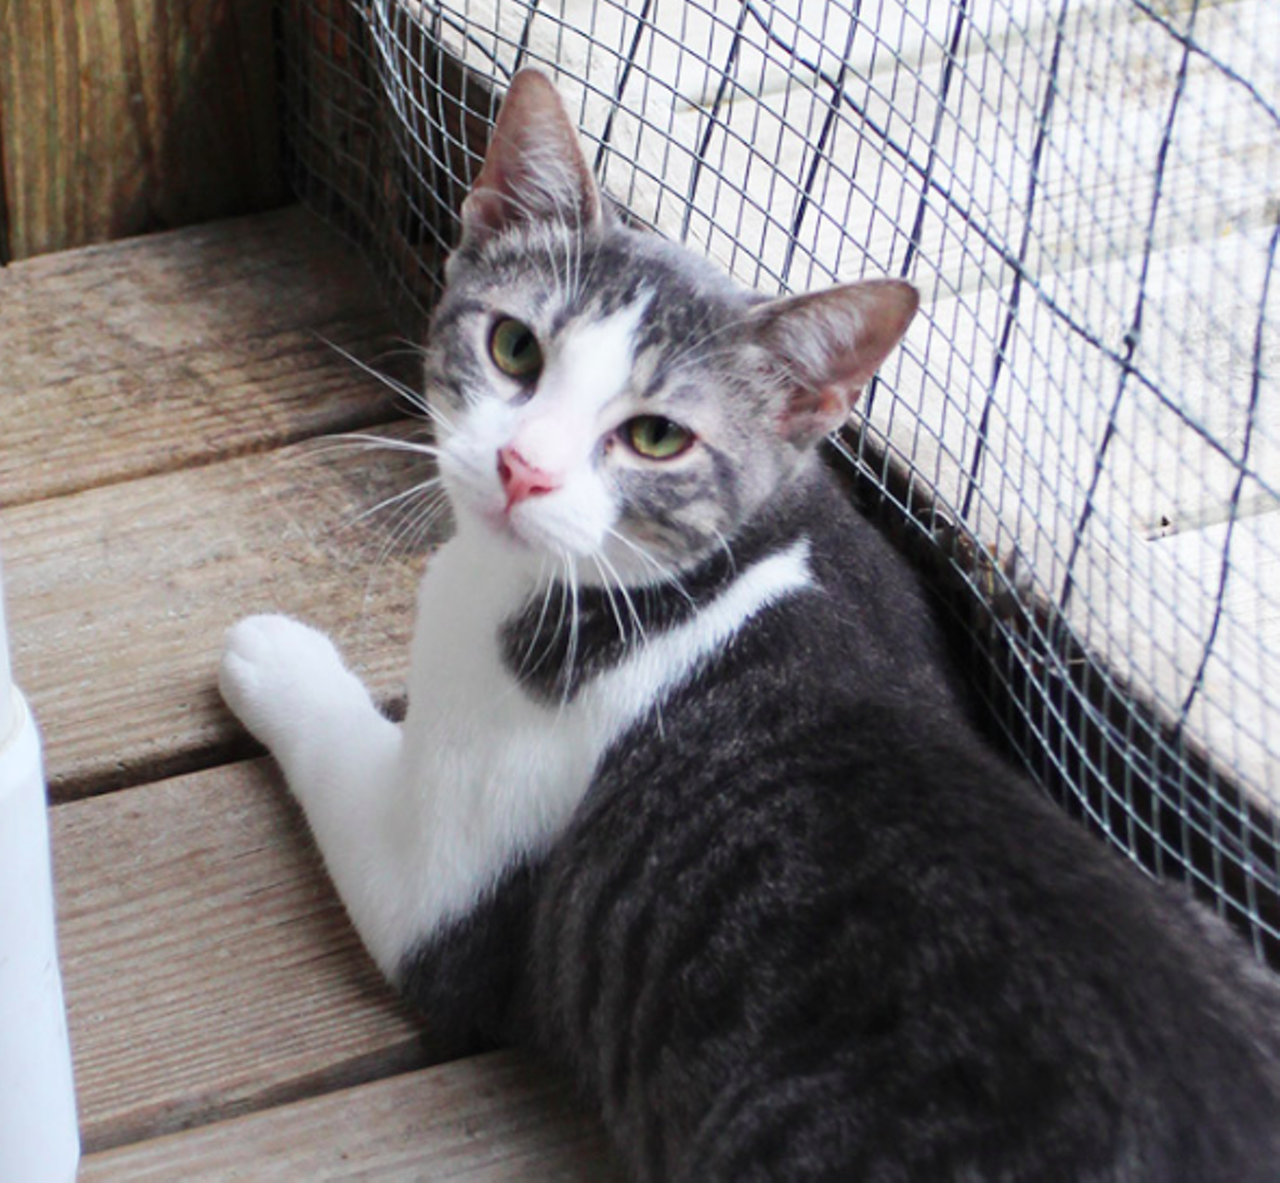 Dwight
"Hi, I’m Dwight! I was found by a nice person and now I’m here to find my forever home. I am shy but that’s only because everything around me is so new to me. Will you give me a chance to be your friend?"